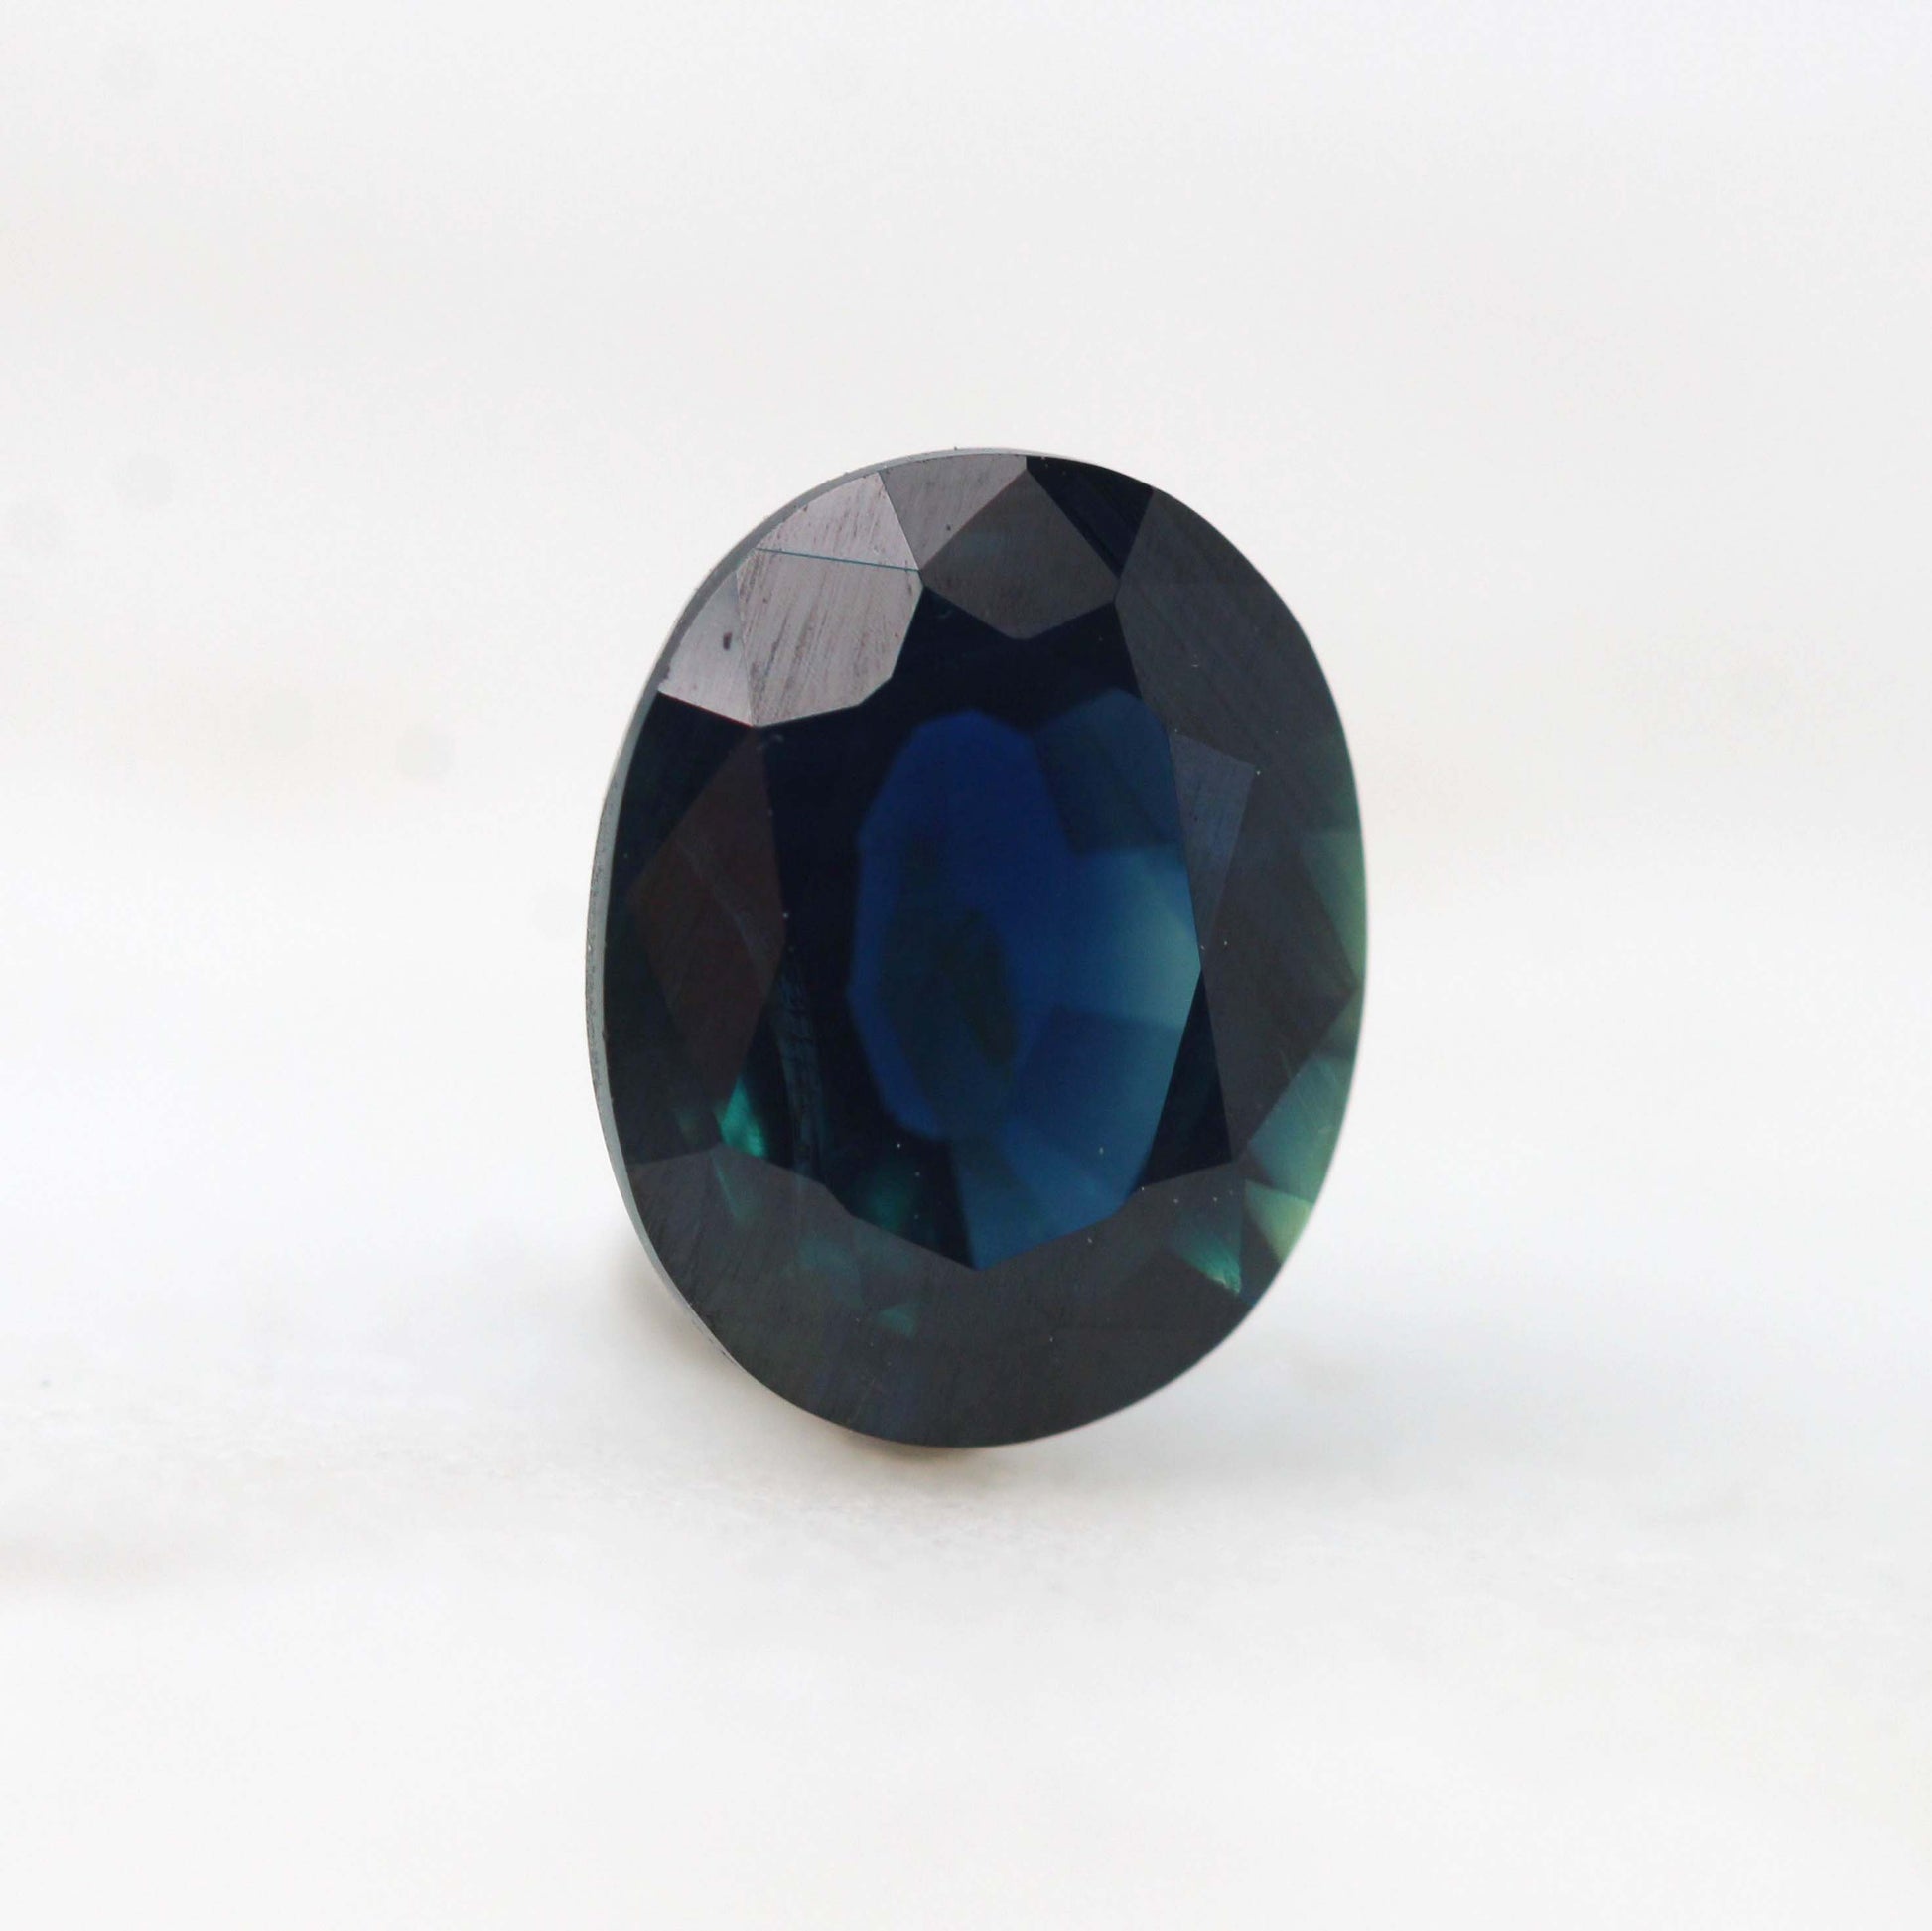 2.03 Carat Dark Teal Oval Sapphire for Custom Work - Inventory Code DTOS203 - Midwinter Co. Alternative Bridal Rings and Modern Fine Jewelry